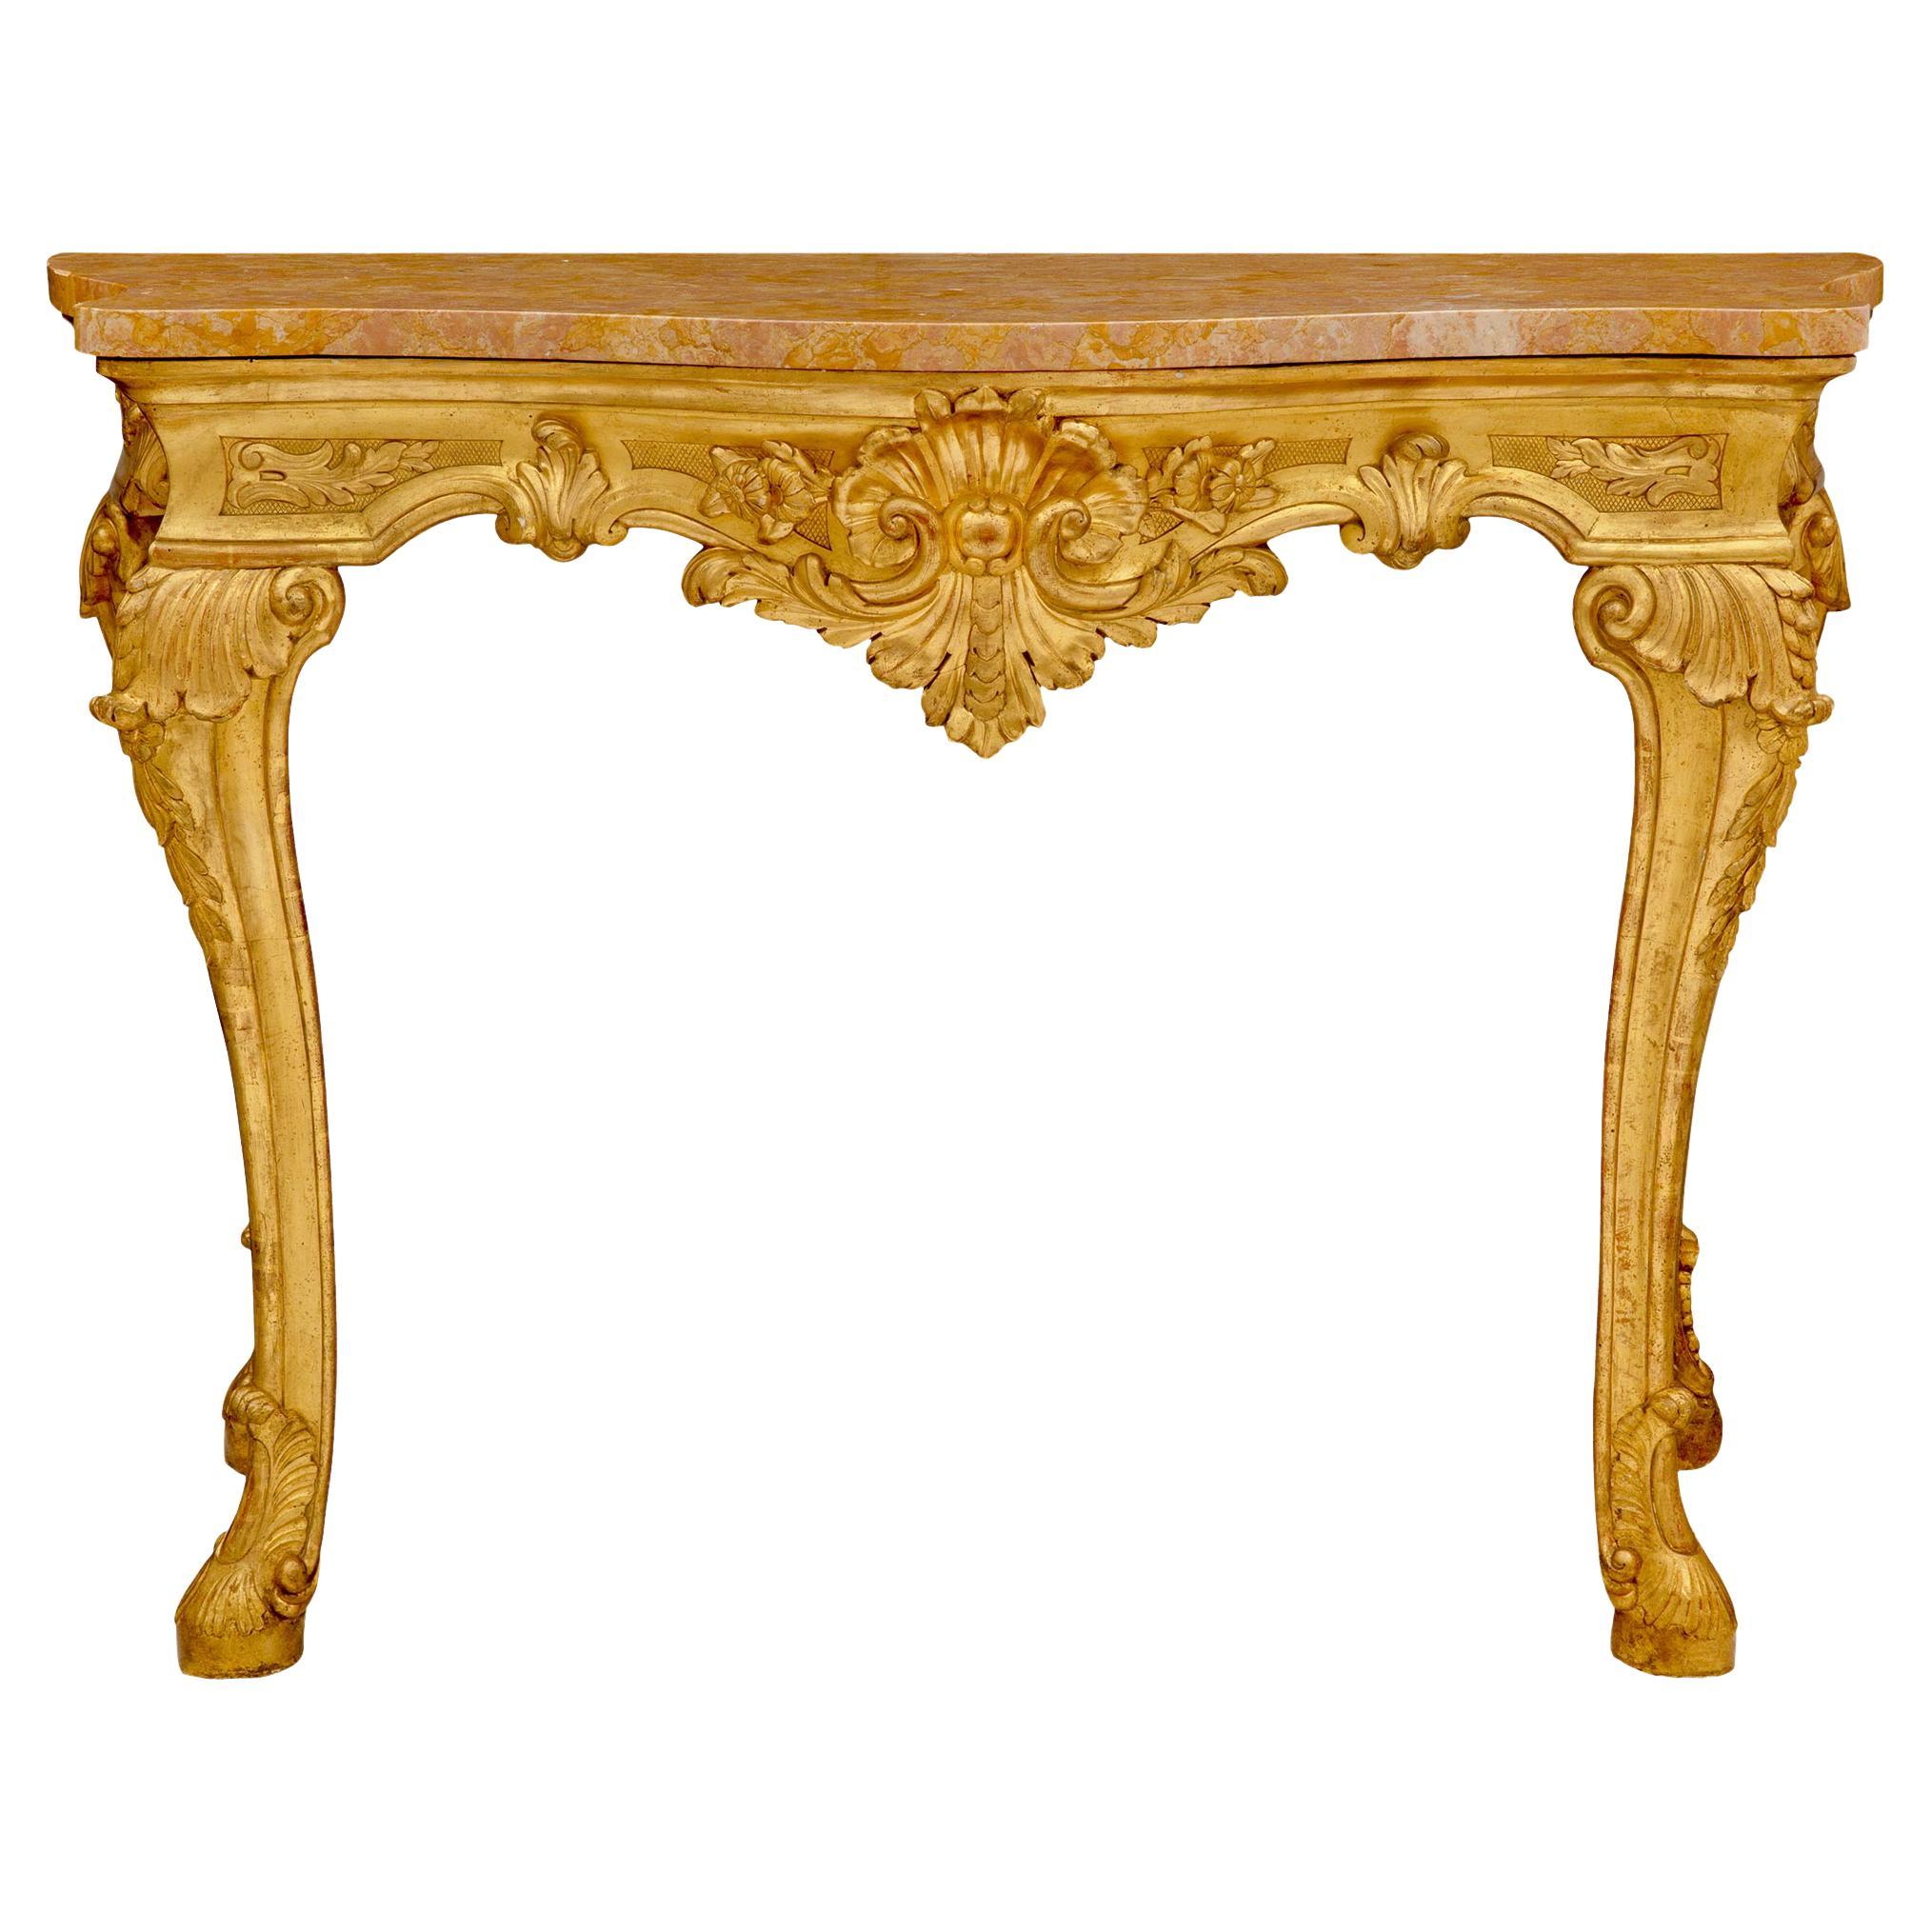 Italian 18th Century Louis XV Period Giltwood and Rose Phocéen Marble Console